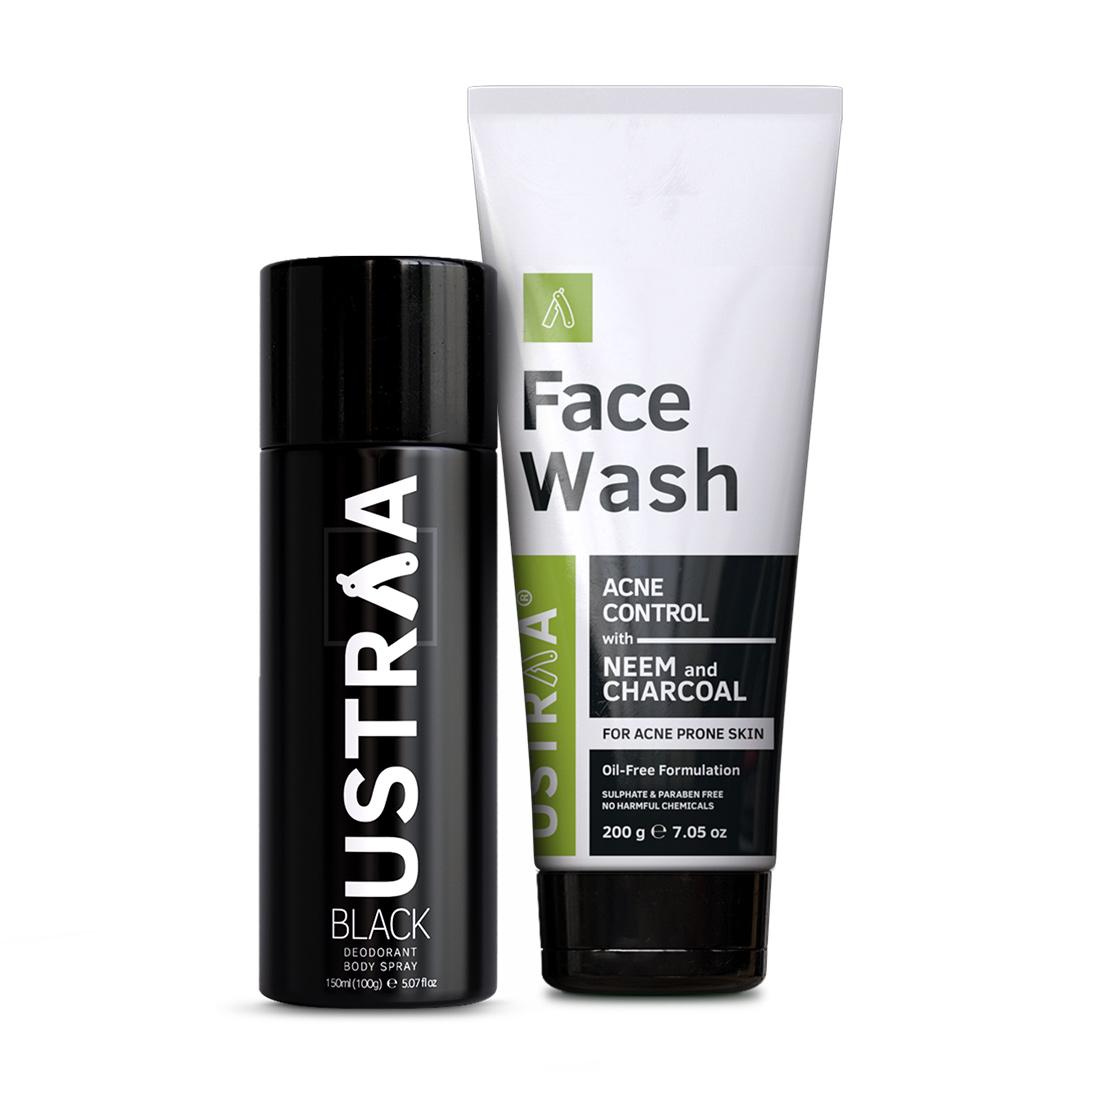 Ustraa Ultimate Combo for Men: Deodorant Black and Face Wash (Neem and Charcoal)